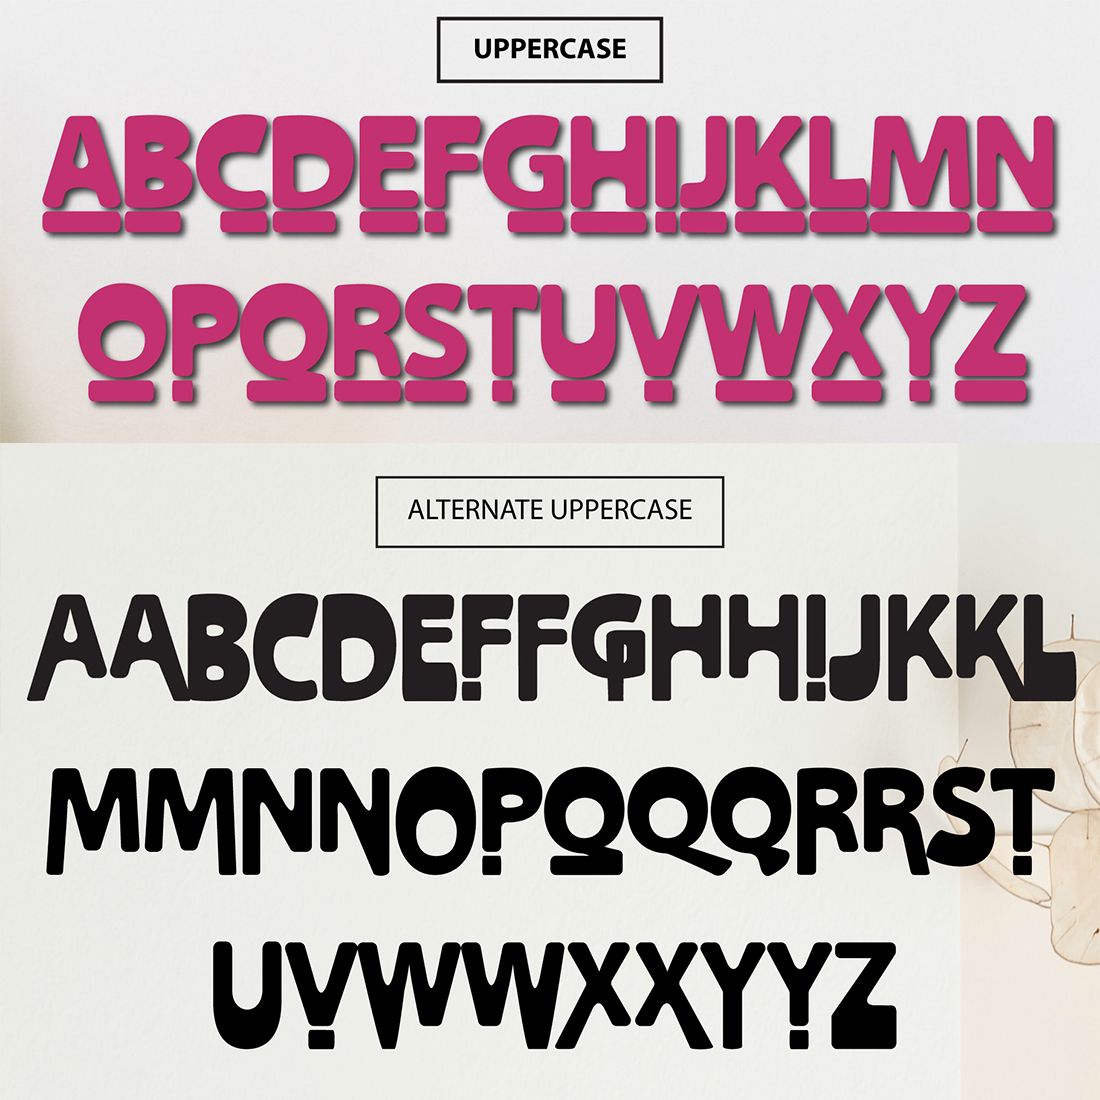 Retro Display Font uppercase and alternative uppercase preview.